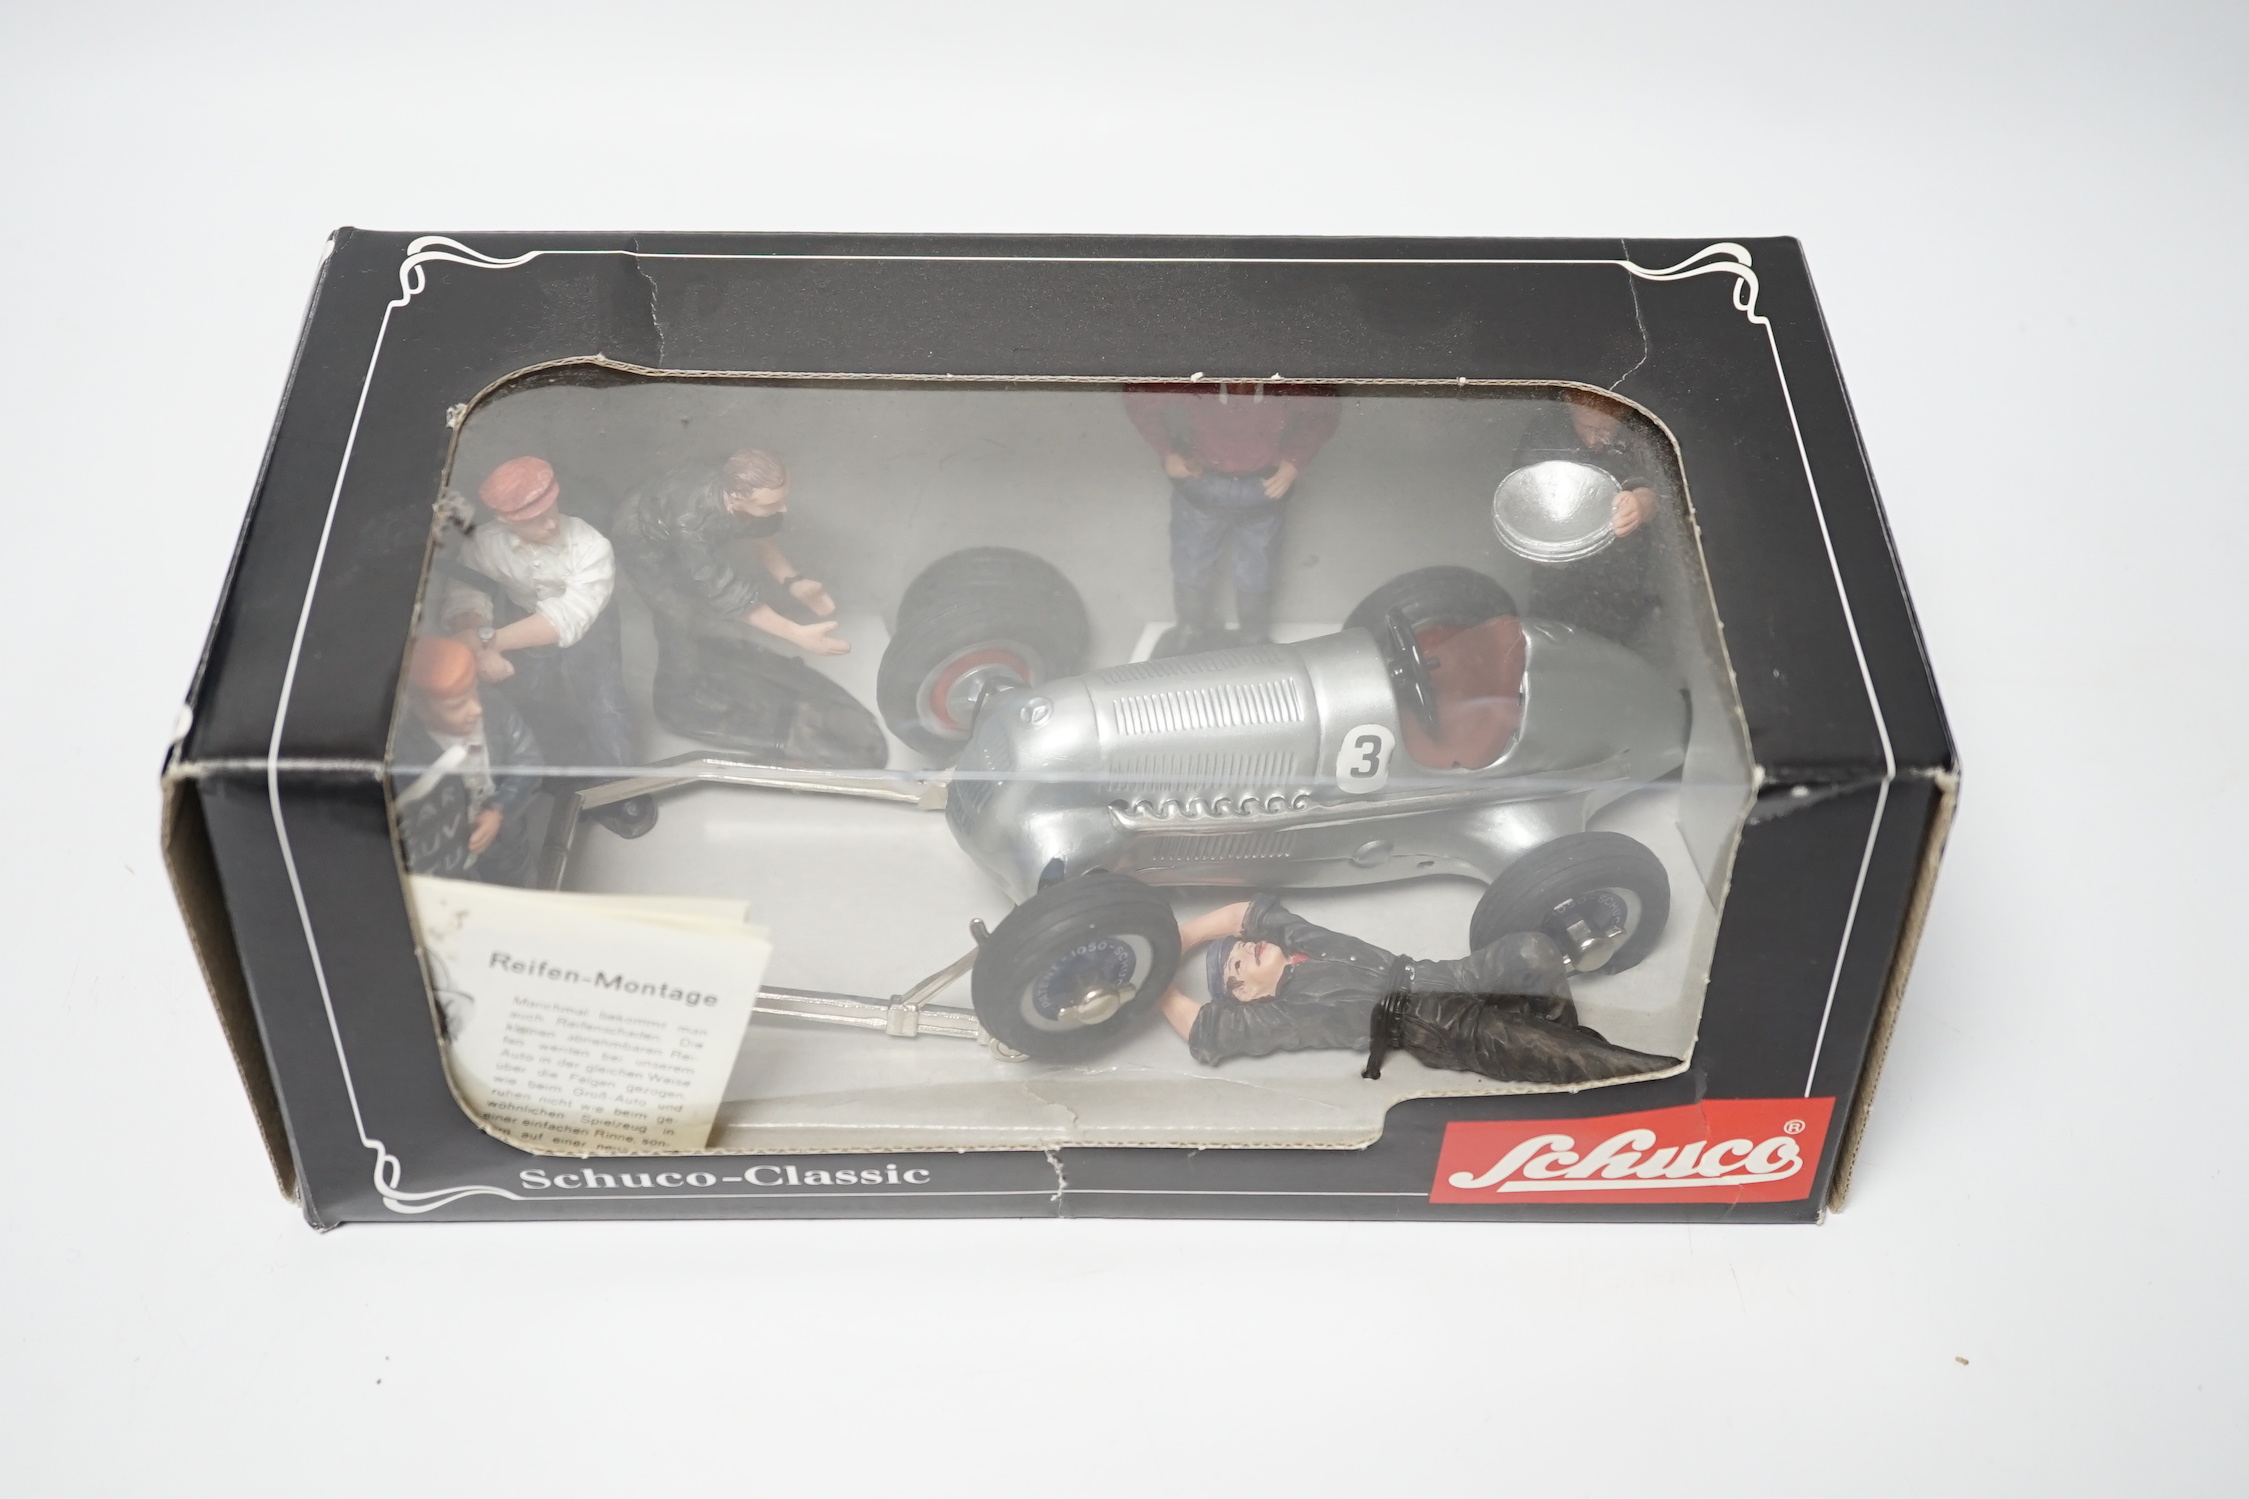 Schuco boxed Grand Prix racer at pit stop